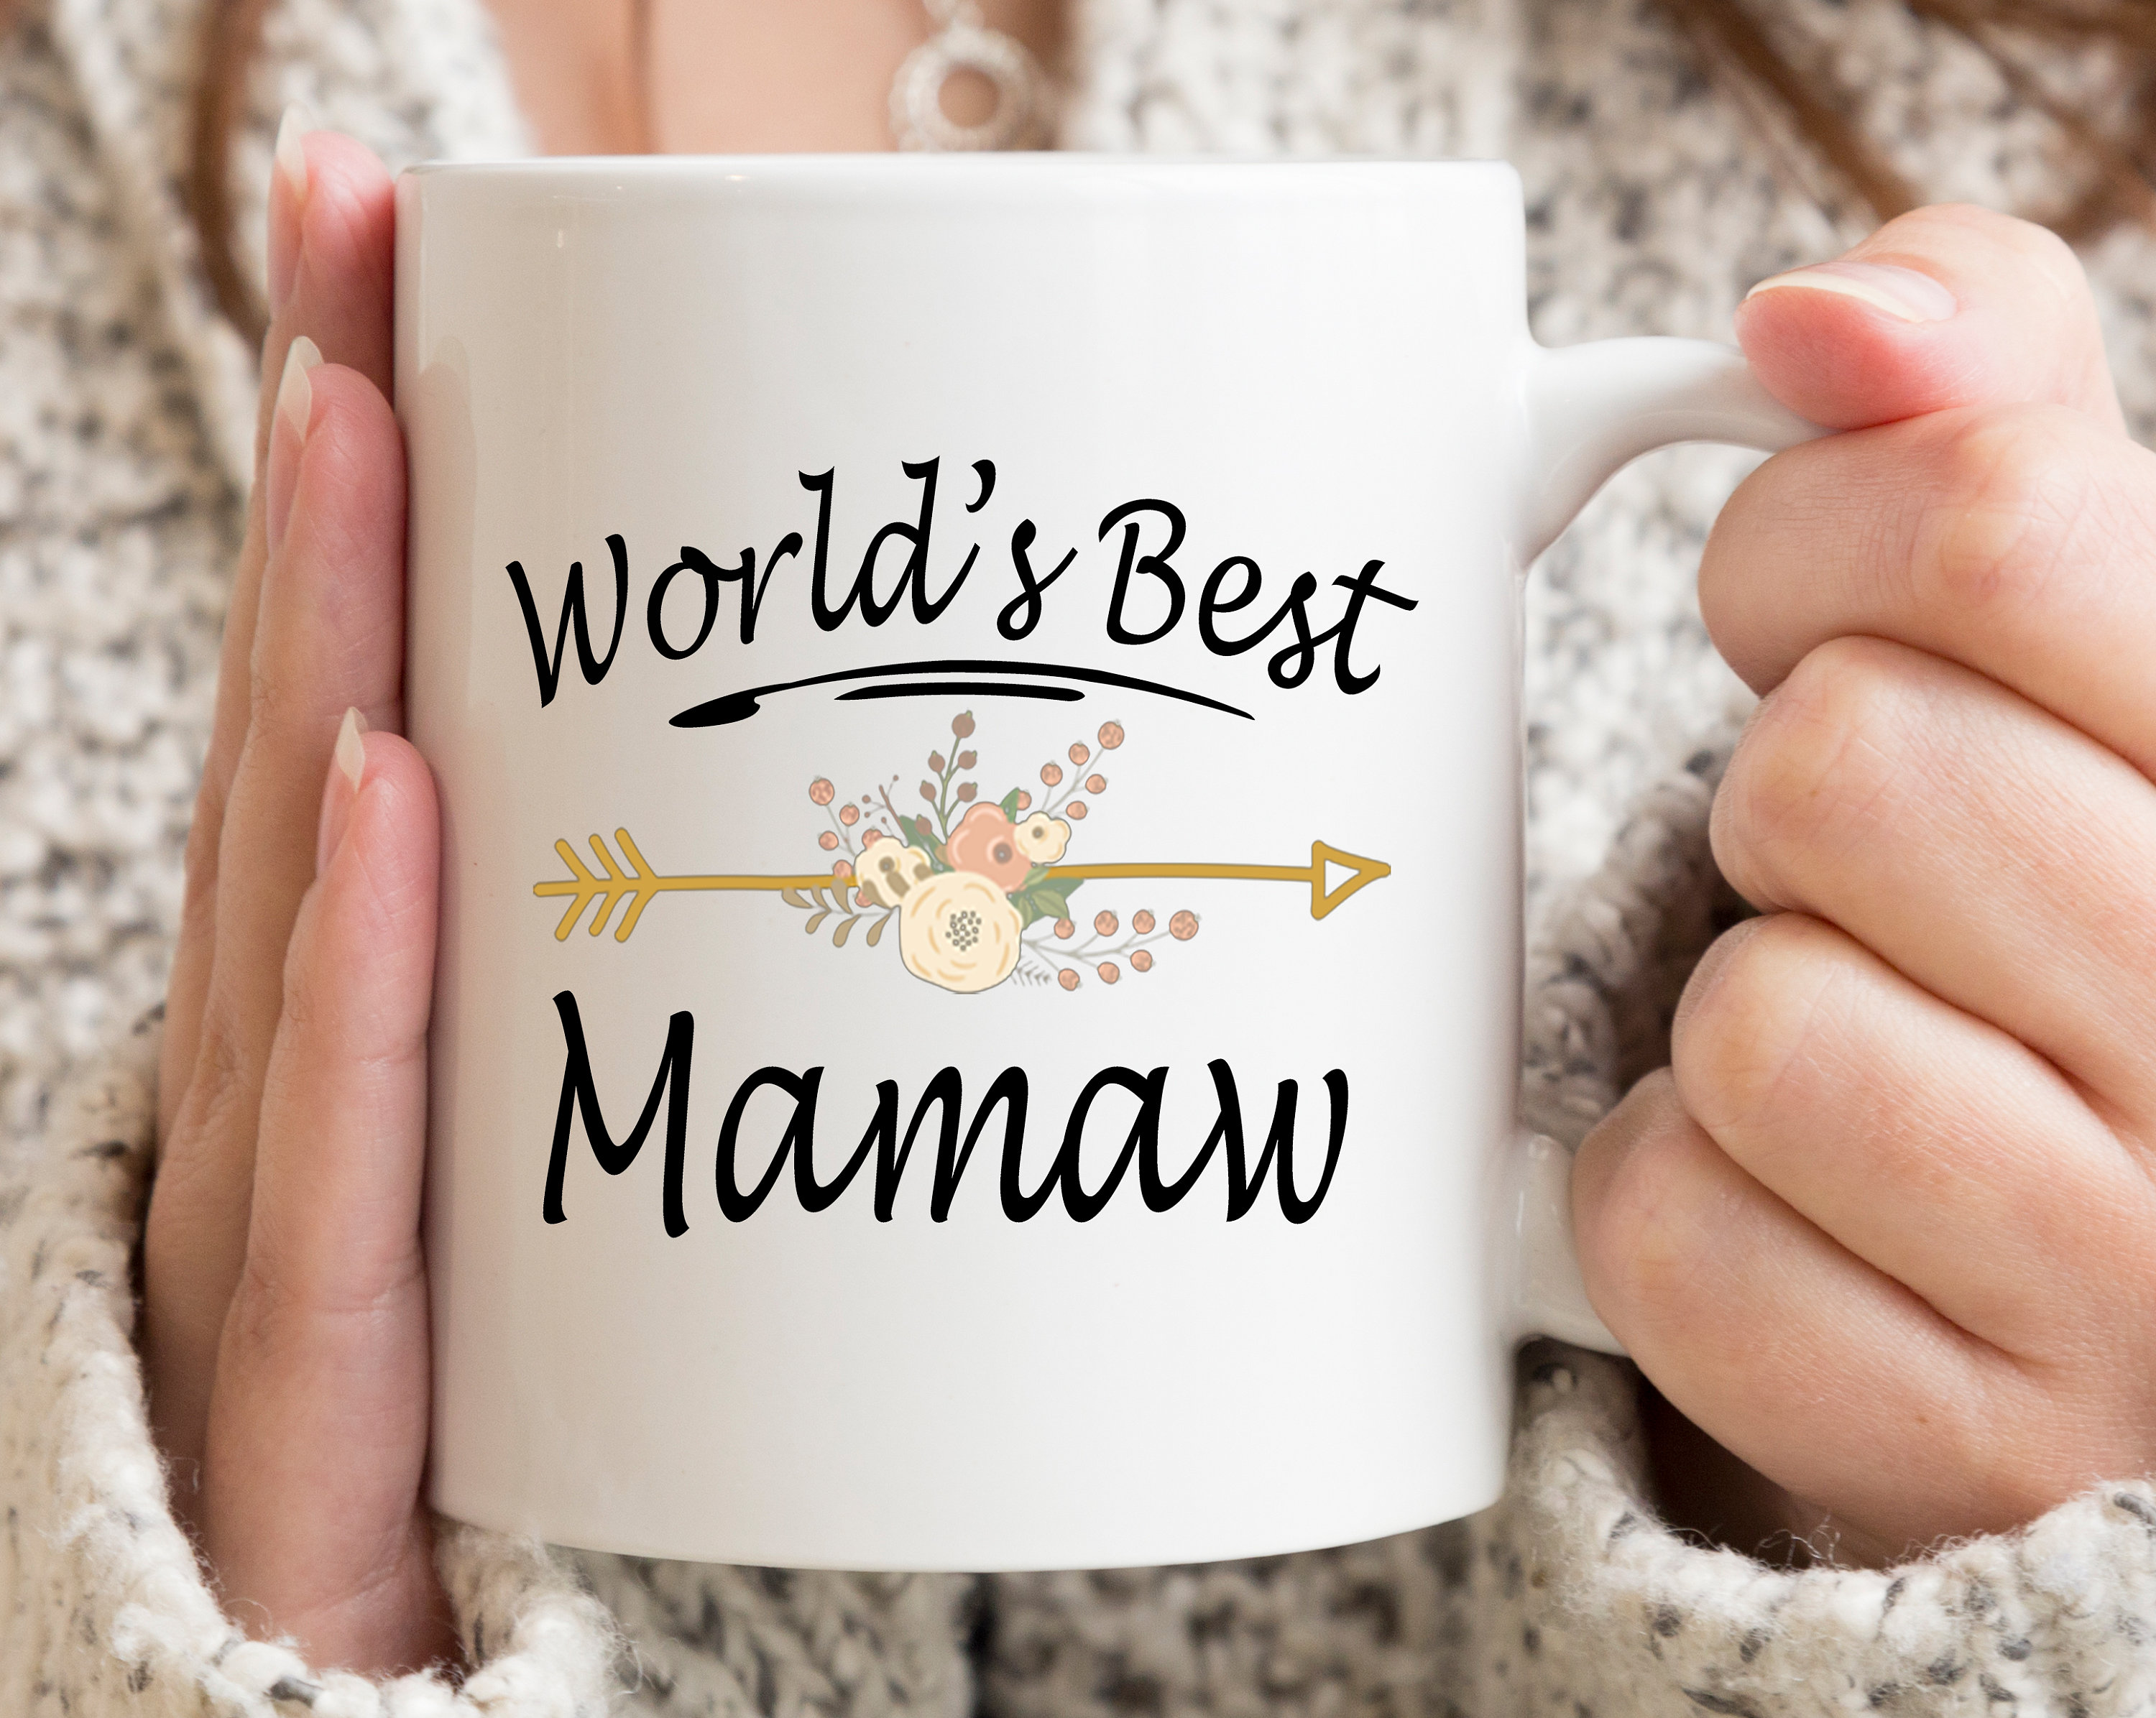 Only The Best Mamaws Get Promoted to Great Mamaw Coffee Mug Tea Cup -  RANSALEX